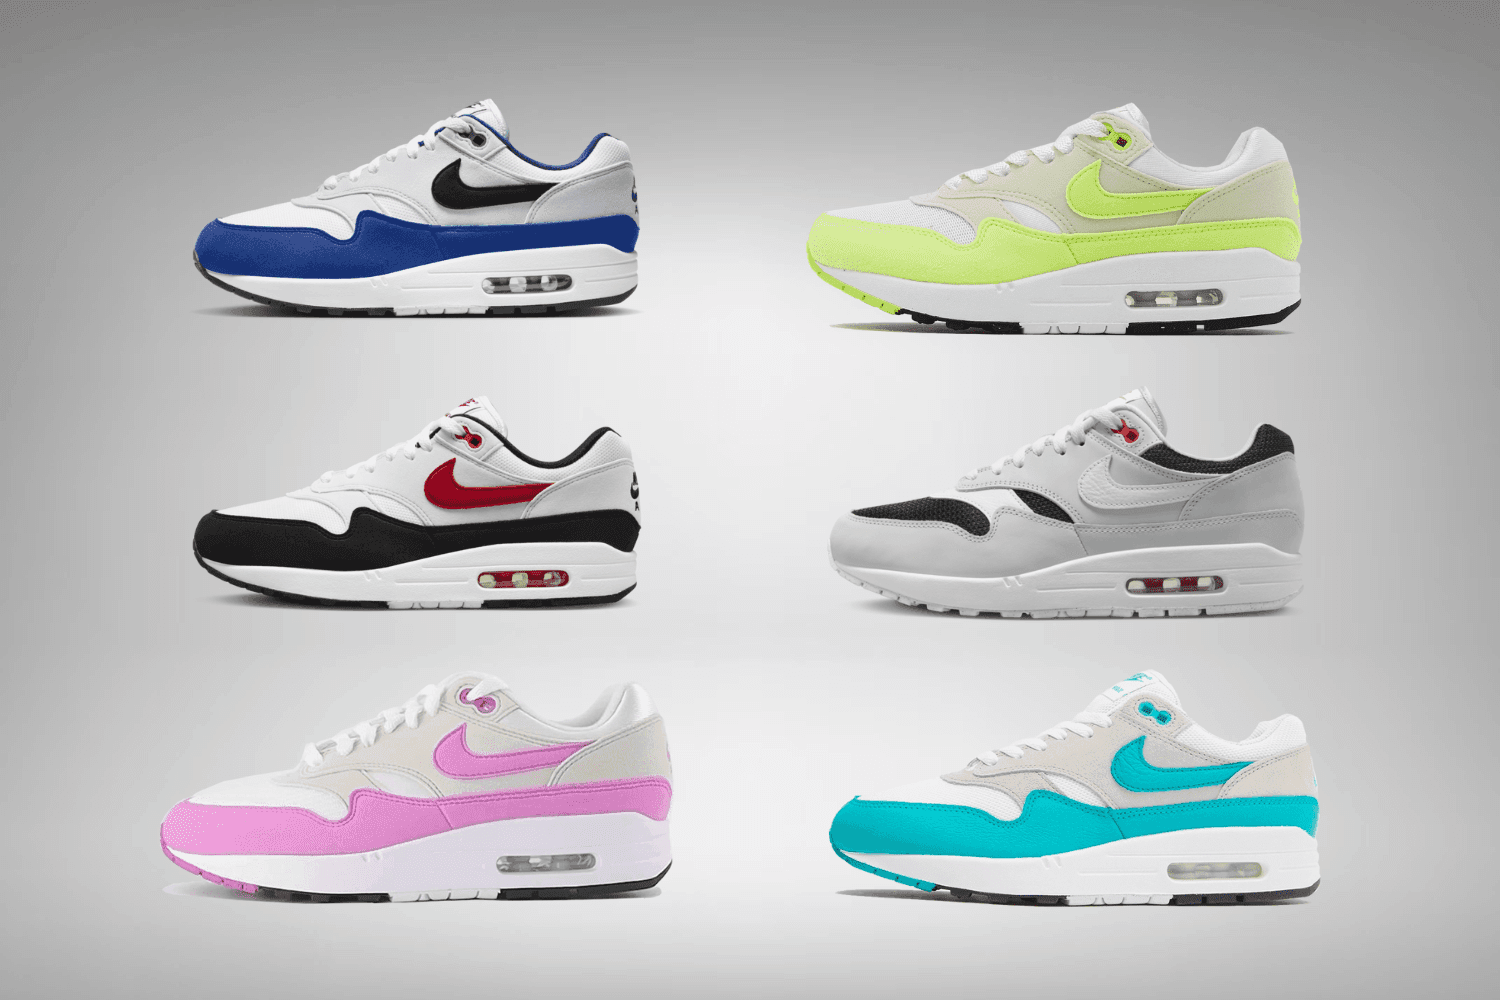 Upcoming Nike Air Max 1 releases for 2023